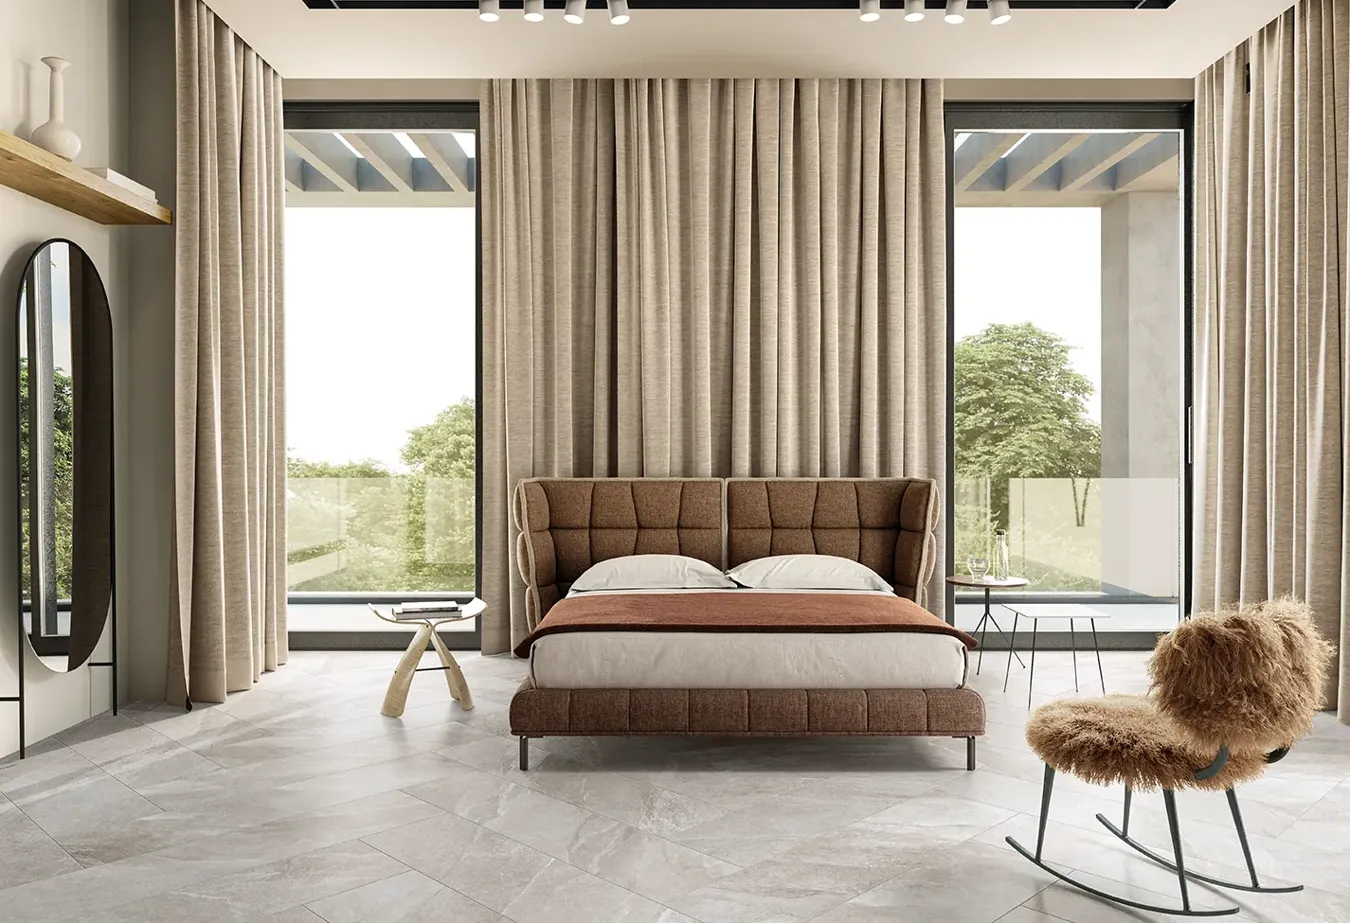 Bright bedroom with Ubik collection stone effect flooring in greige, tufted bed, and large windows.